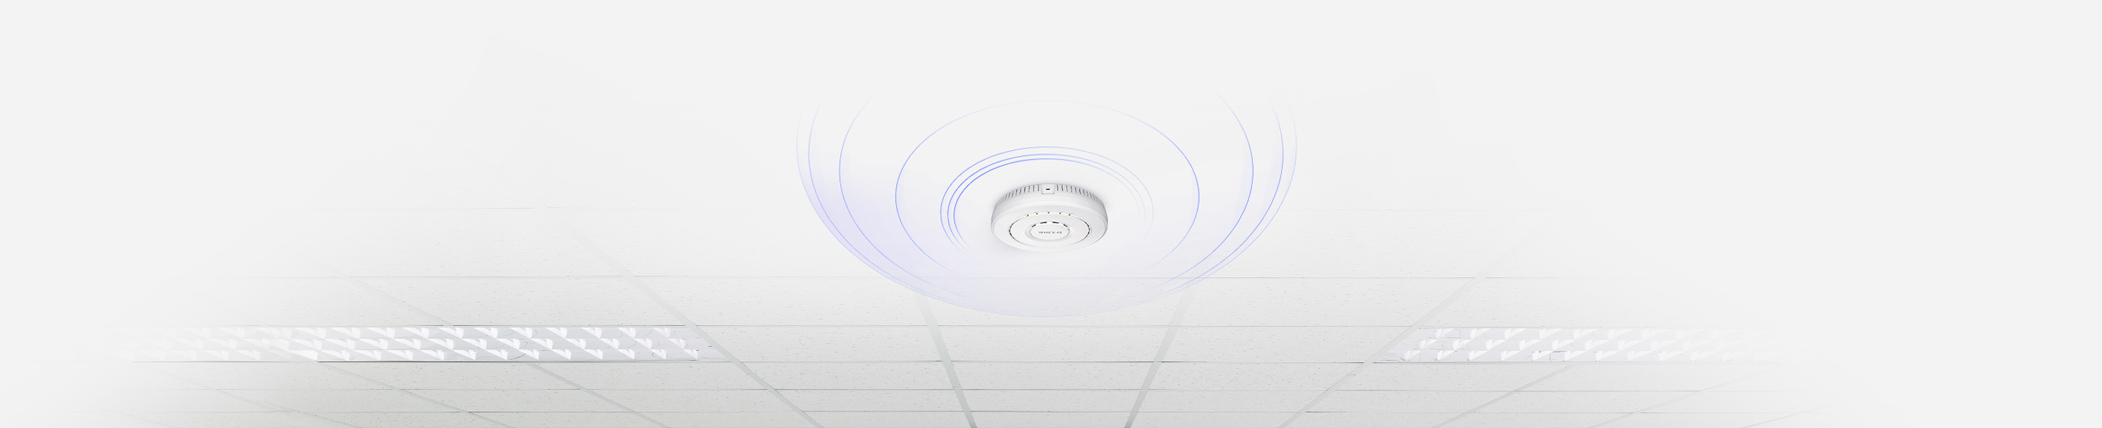 DWL-X8630AP AX3600 Wi-Fi 6 Dual-Band Unified Access Point mounted on a ceiling.